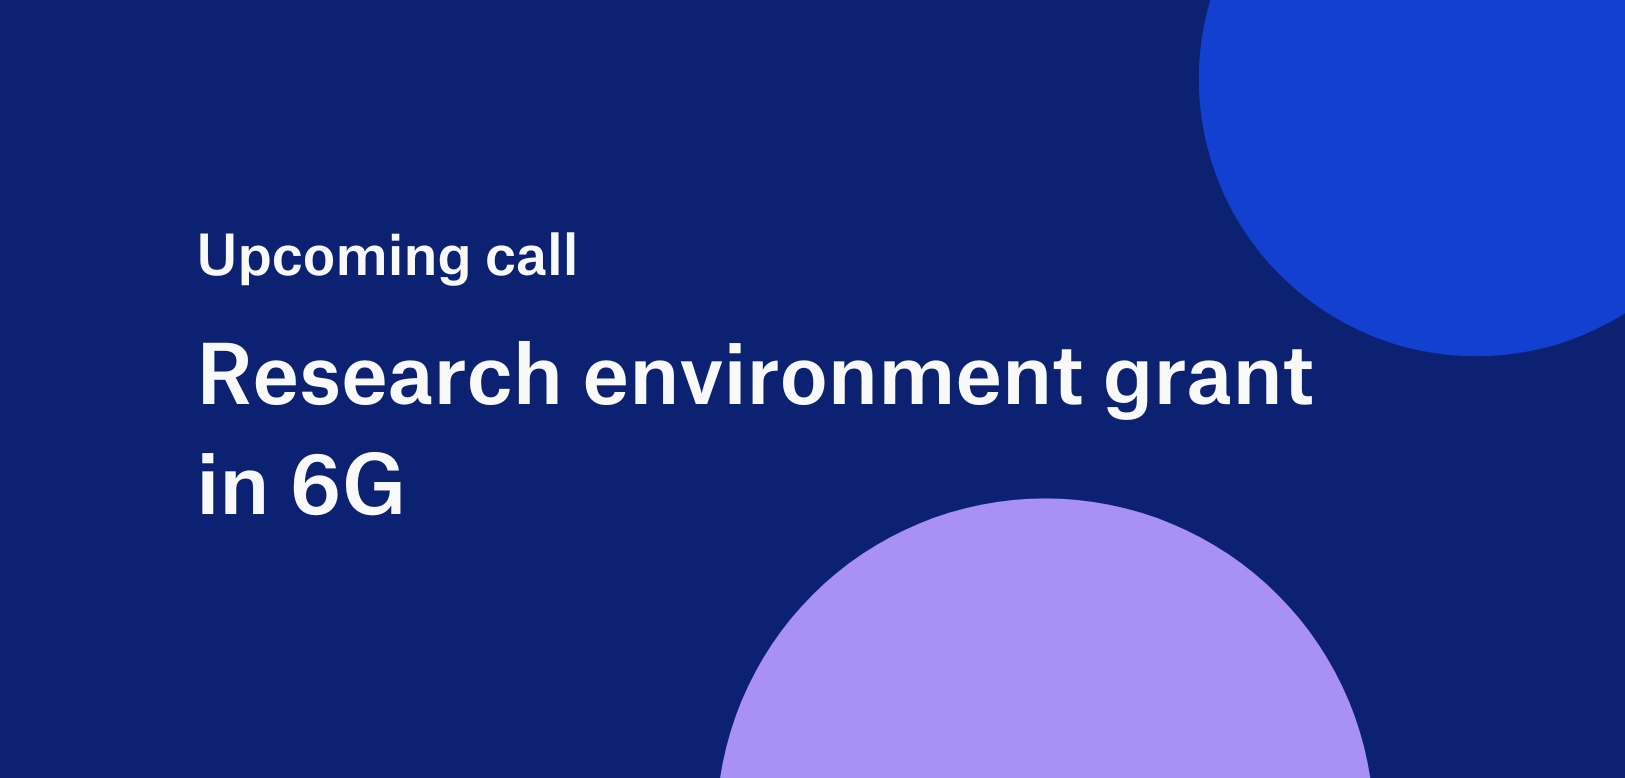 Upcoming call, research environment grant in 6G.